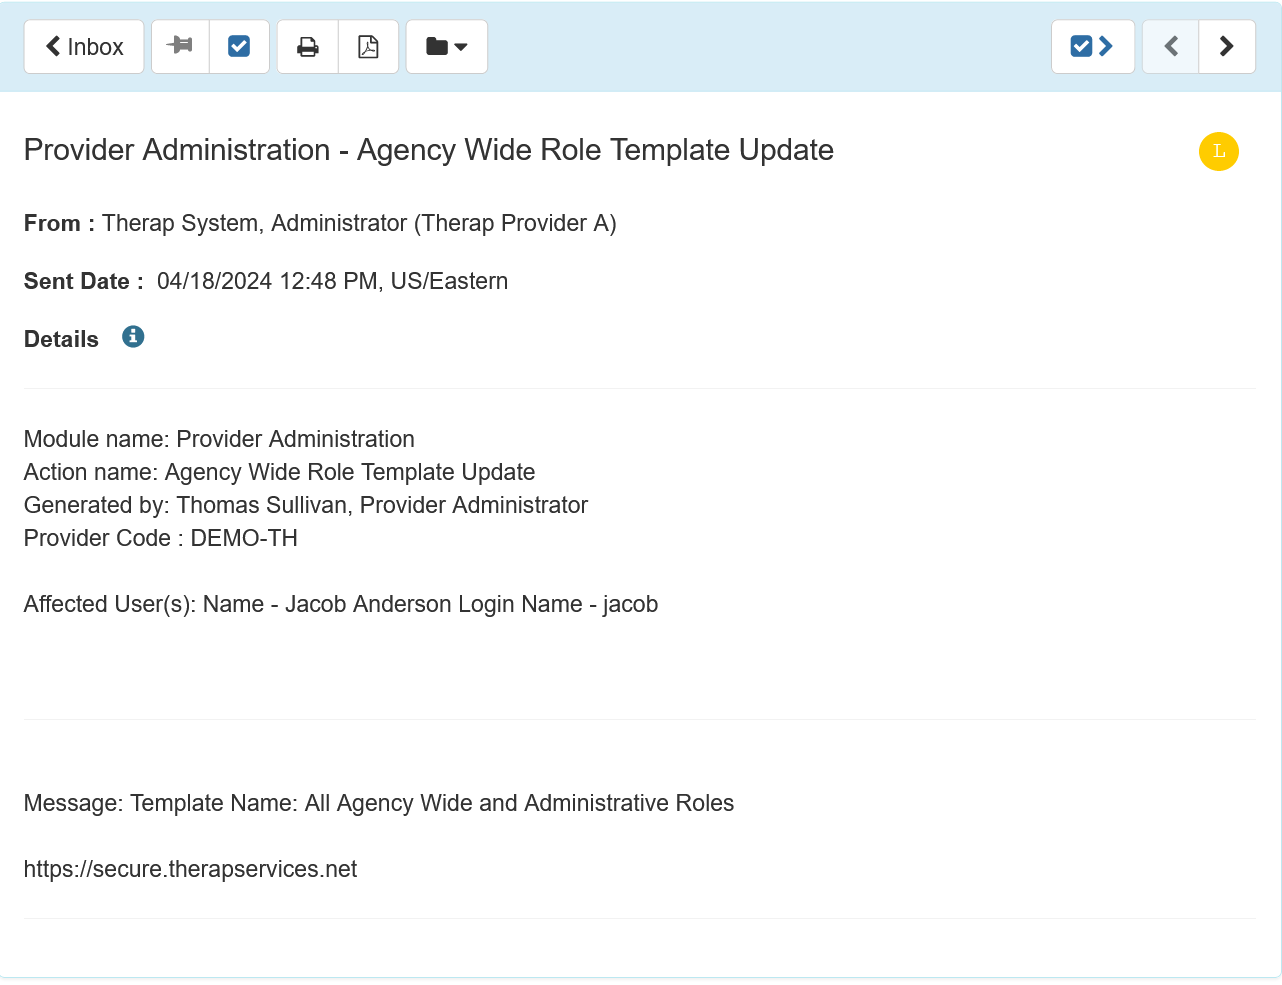 Screenshot showing the Notification message for updating Agency Wide Role Template